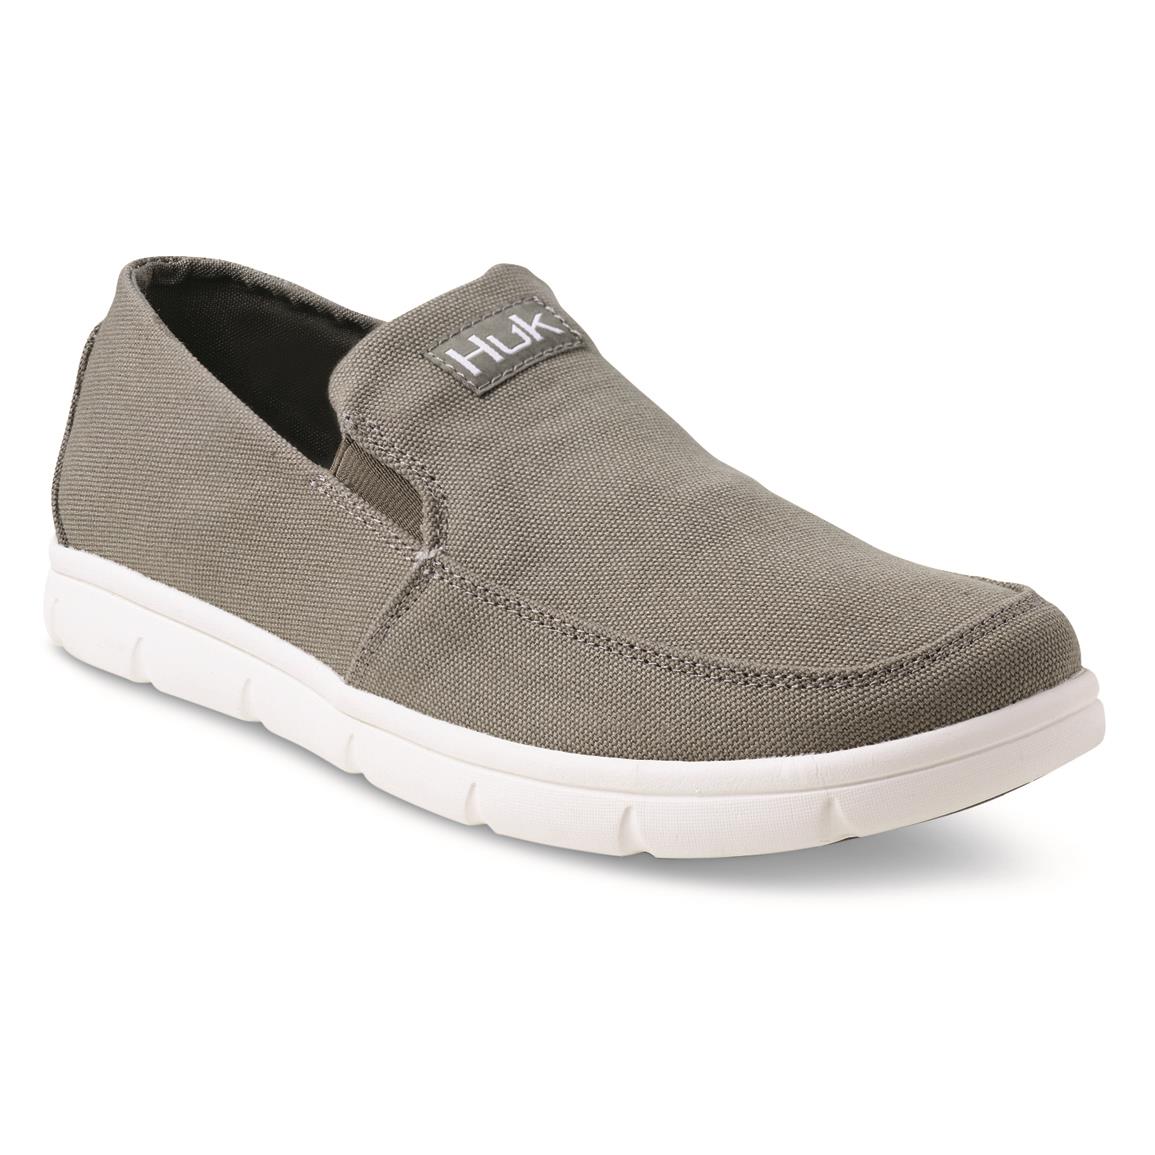 Huk Men's Brewster Classic Slip-On Shoes, Moss